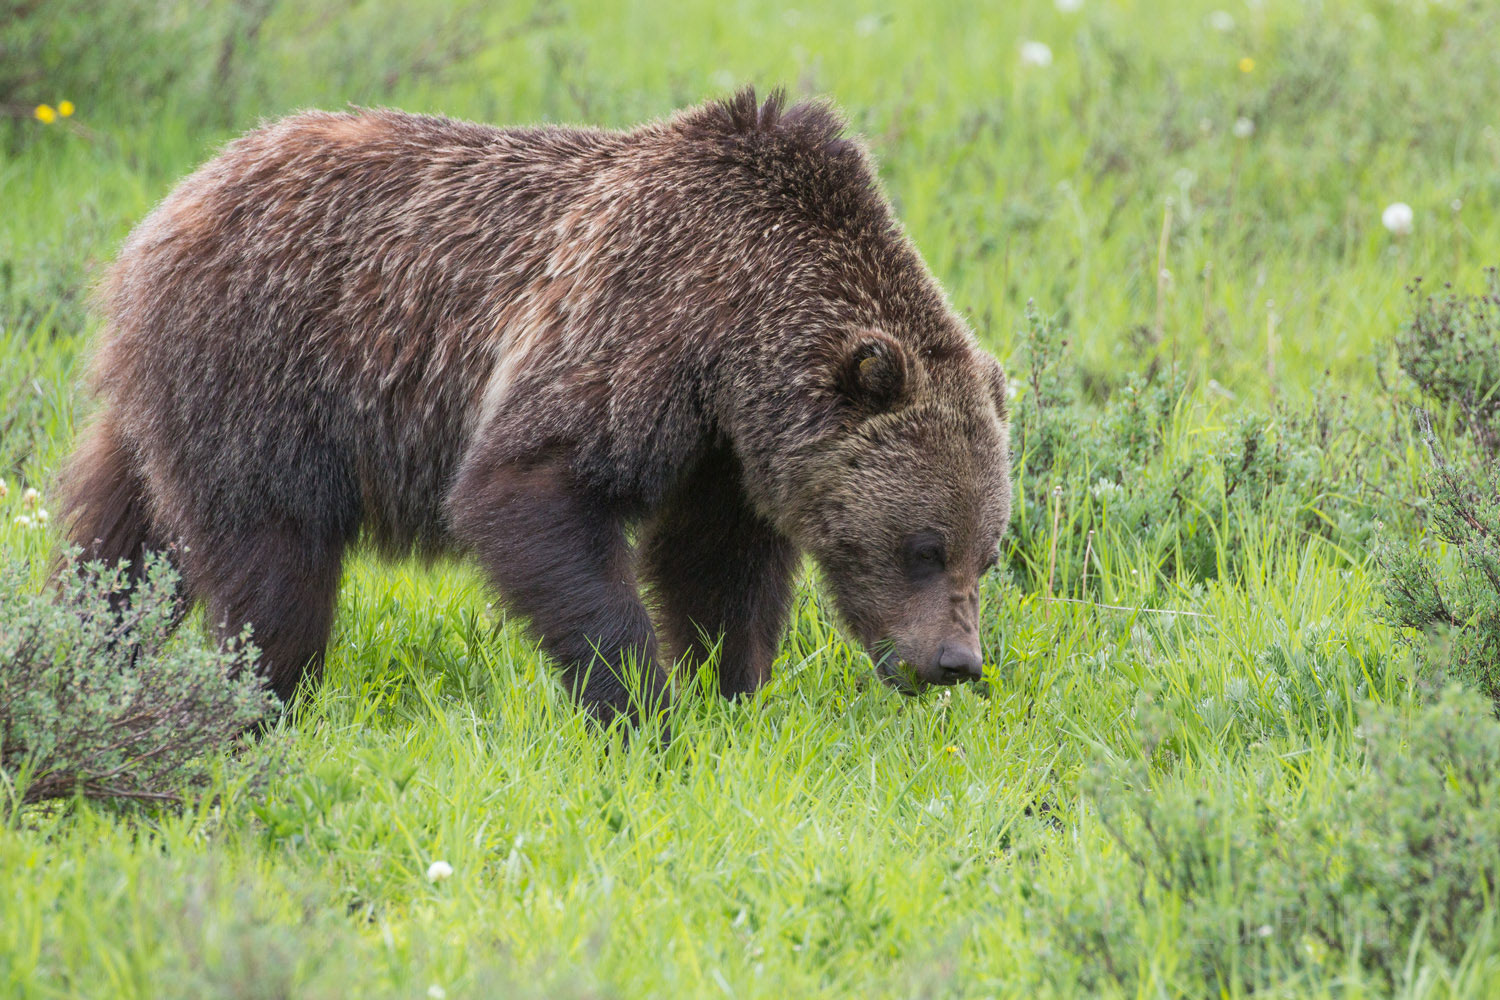 Grizzly bear 760 feeds in a grassy meadow near Oxbow Bend.